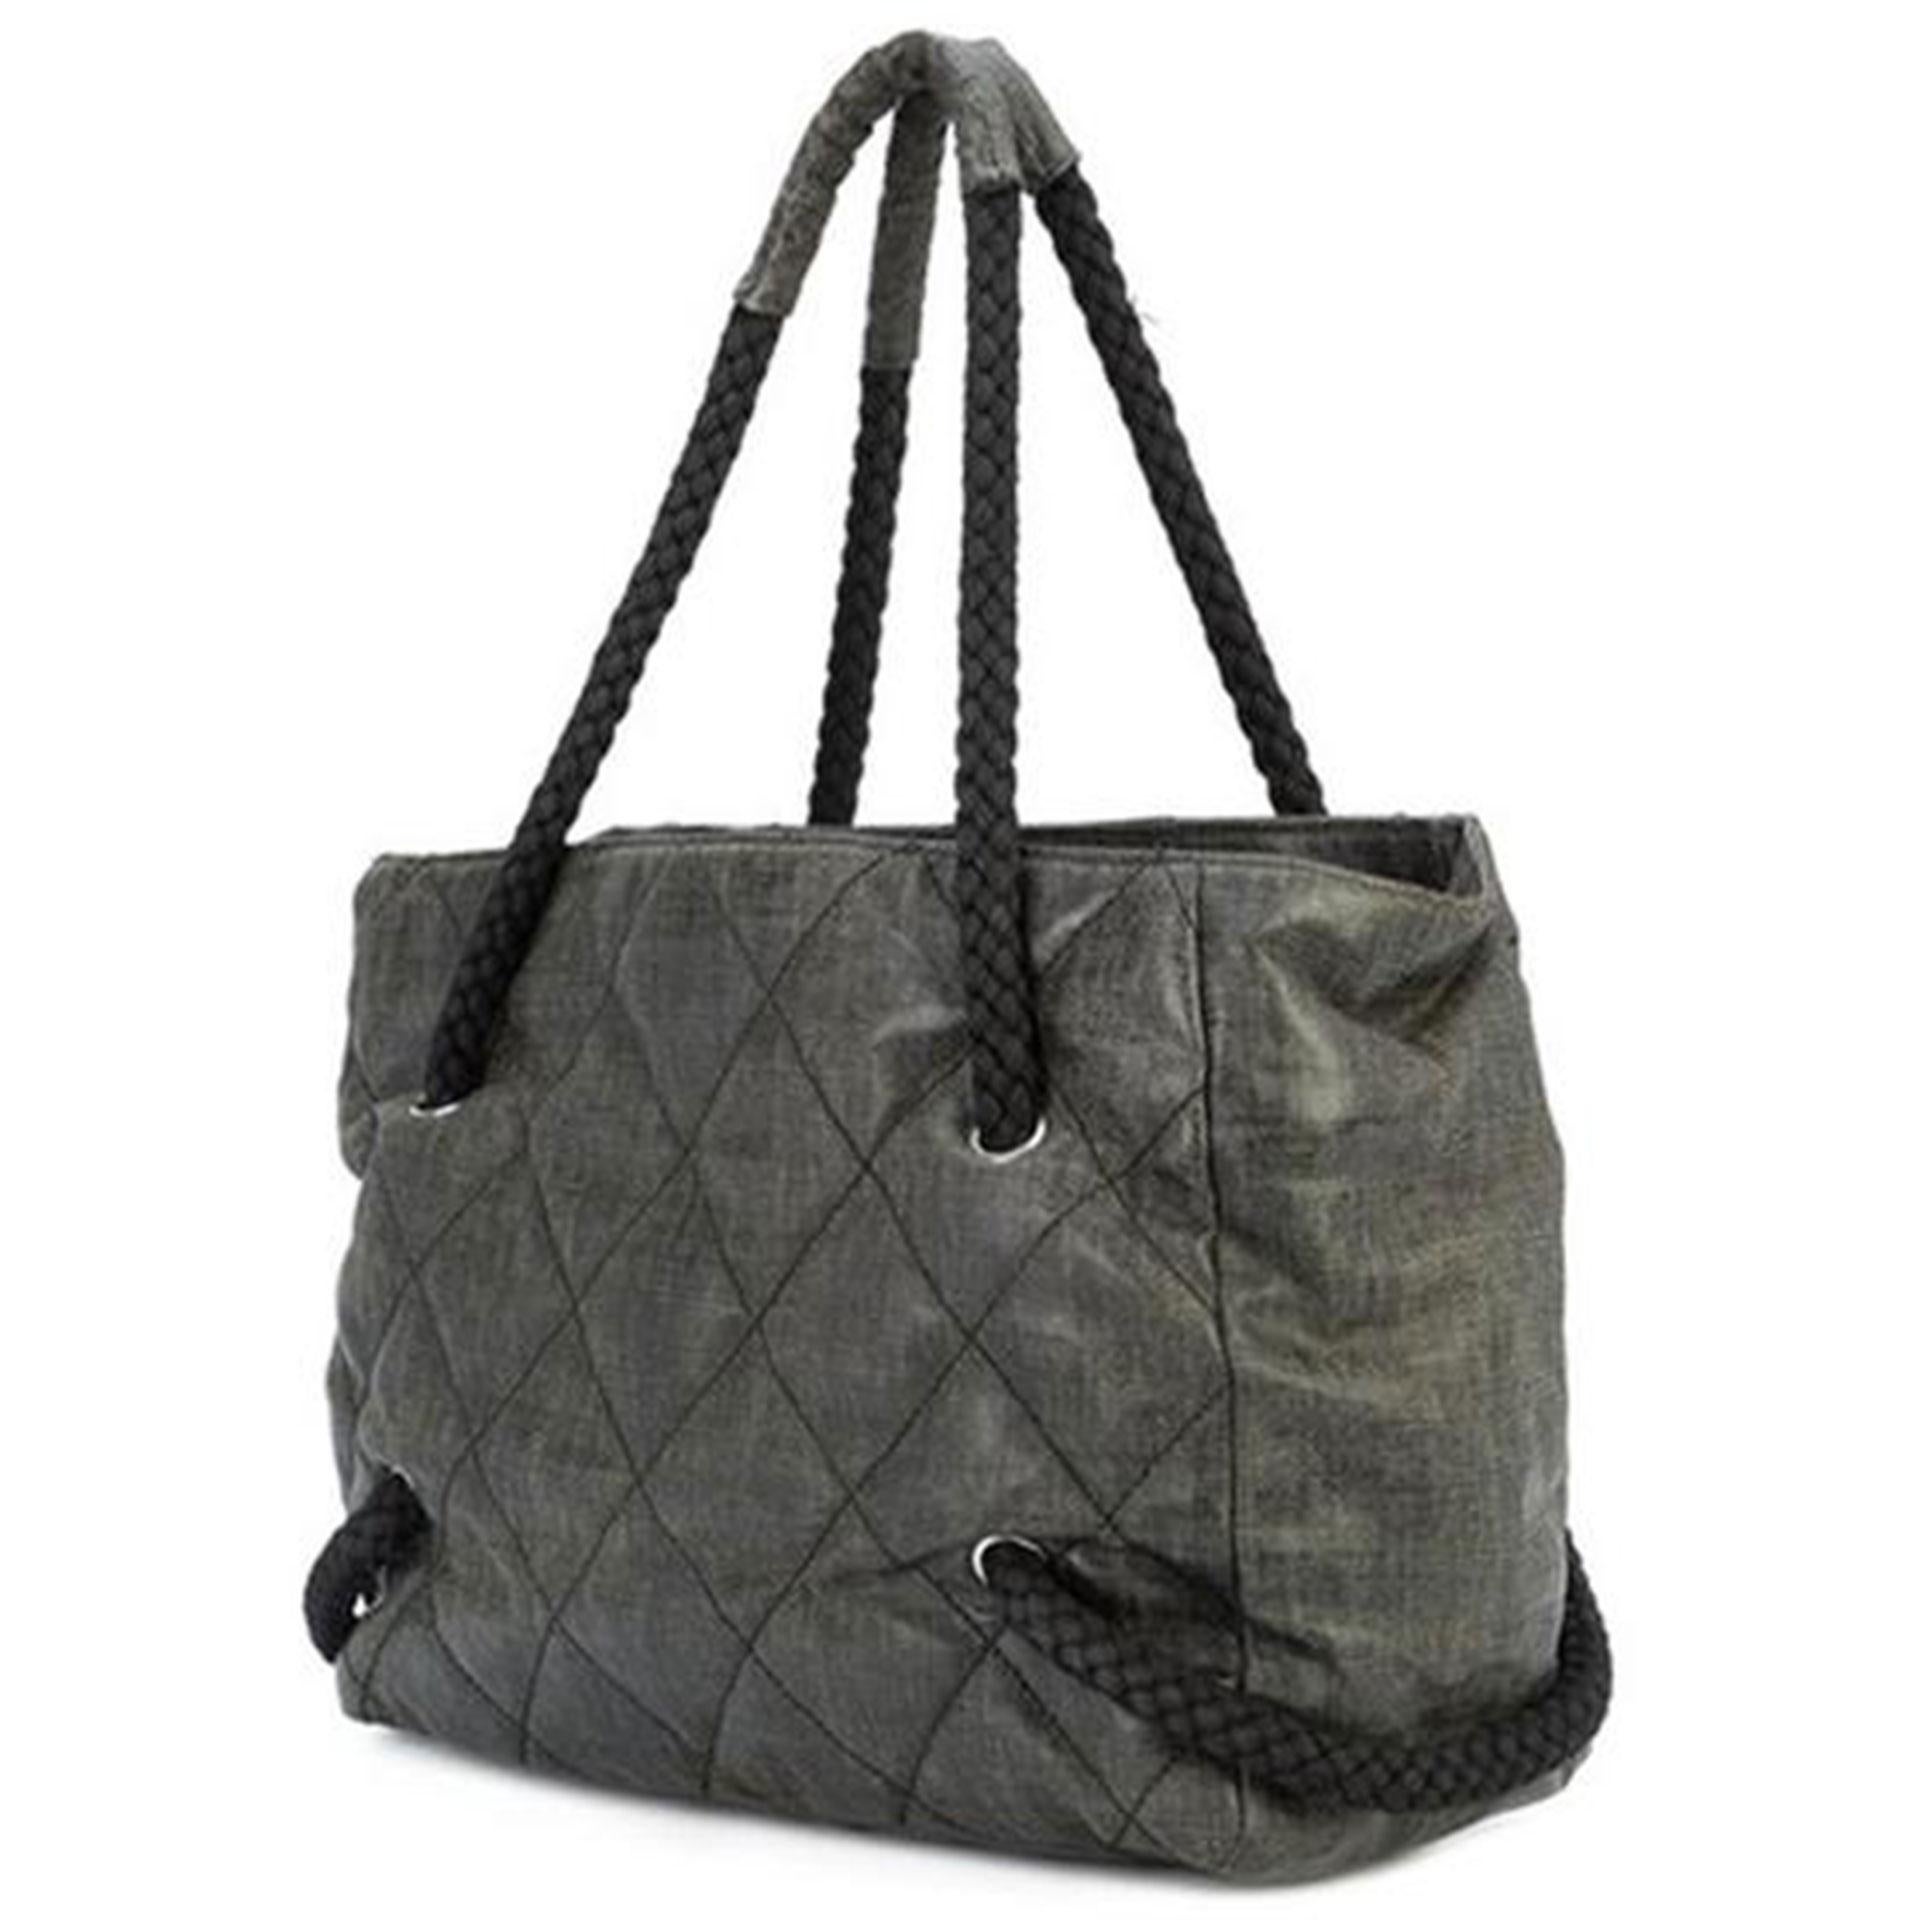 This gorgeous rare Chanel Cruise Tote is made of black coated canvas, braided handles, an open top design, a main internal compartment with zipped pockets, a diamond quilted finish, silver-tone hardware and a large white wooden interlocking CC logo